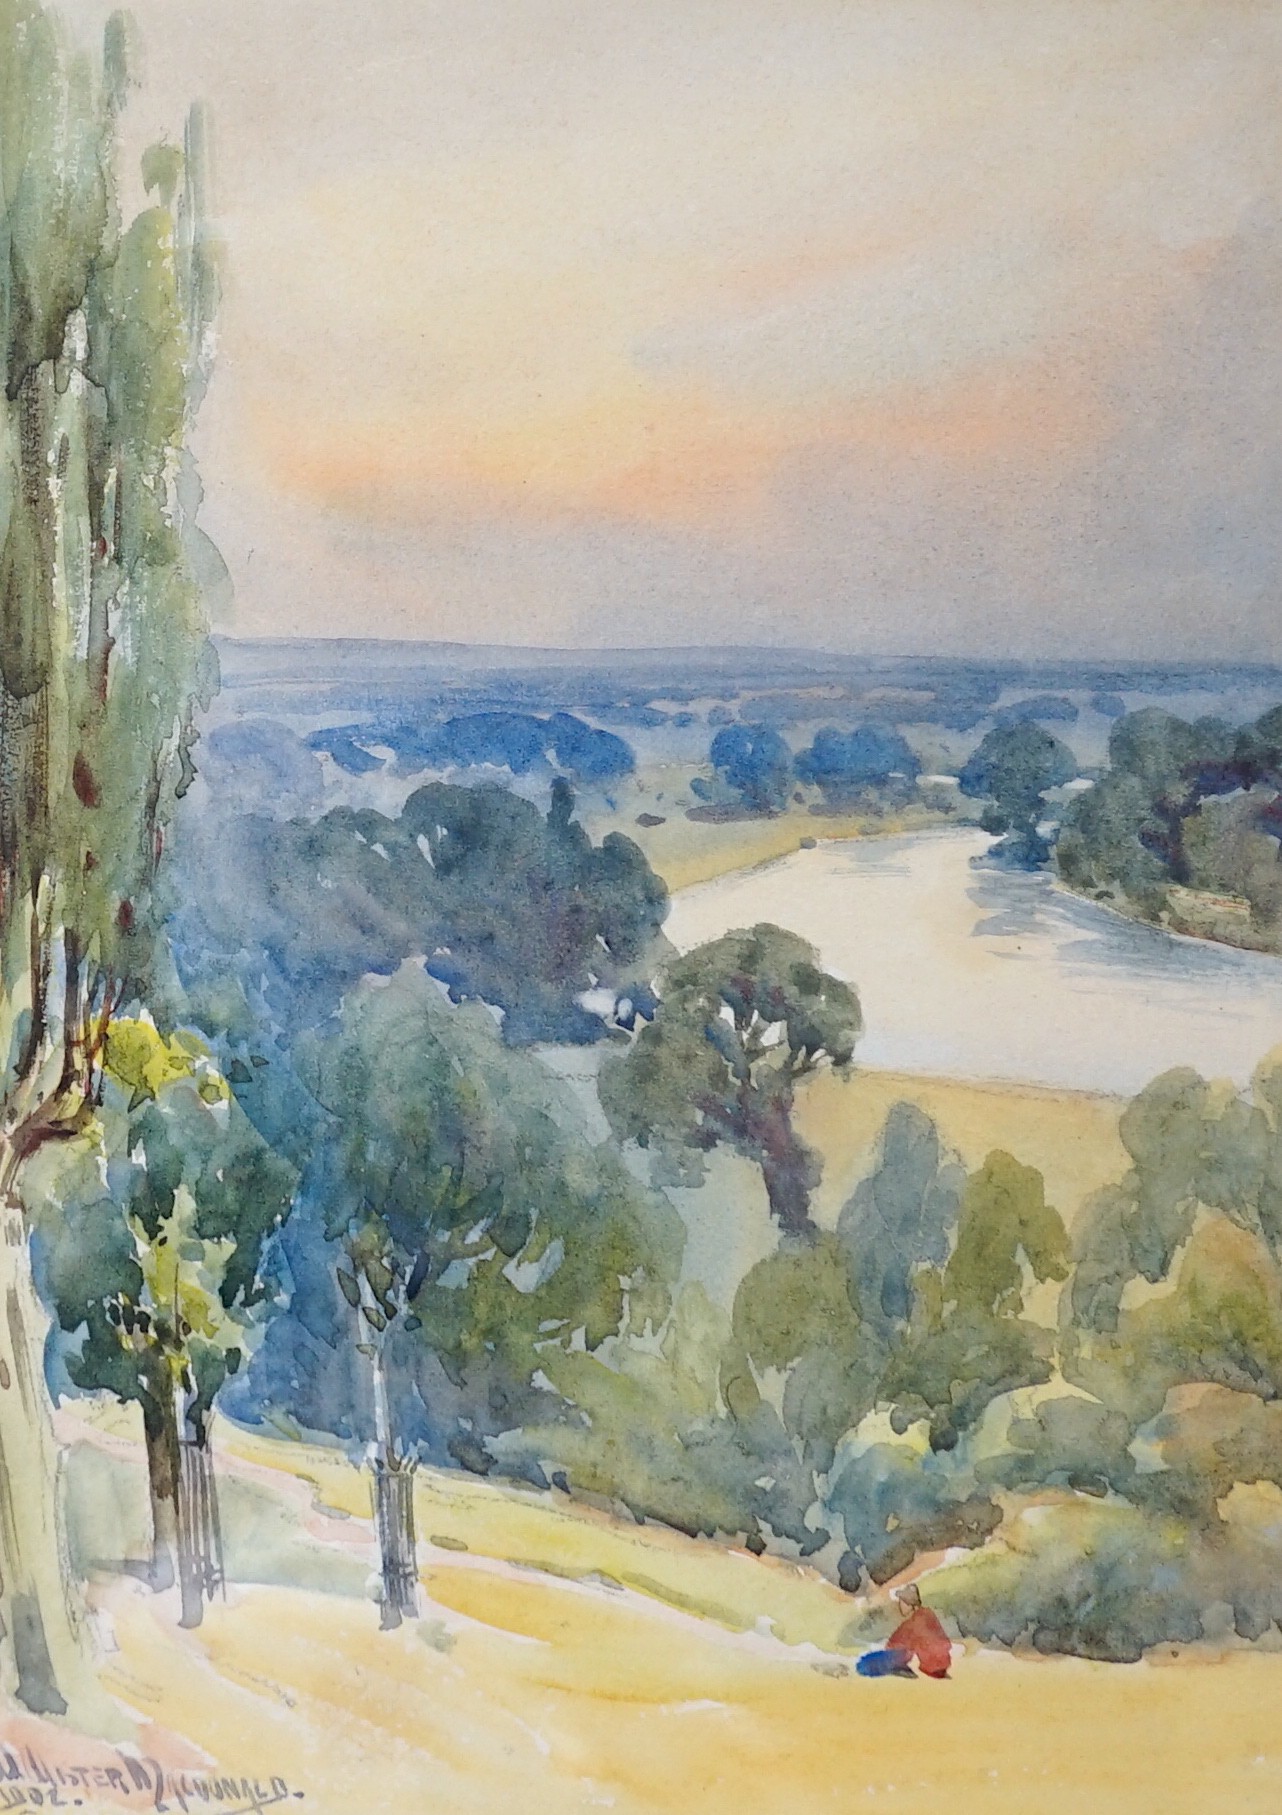 William Alister Macdonald (1861-1948), two watercolours, ' View from Richmond Hill' and 'Continental beach scene', one signed and dated 1902, 22 x 16cm and 16 x 25cm